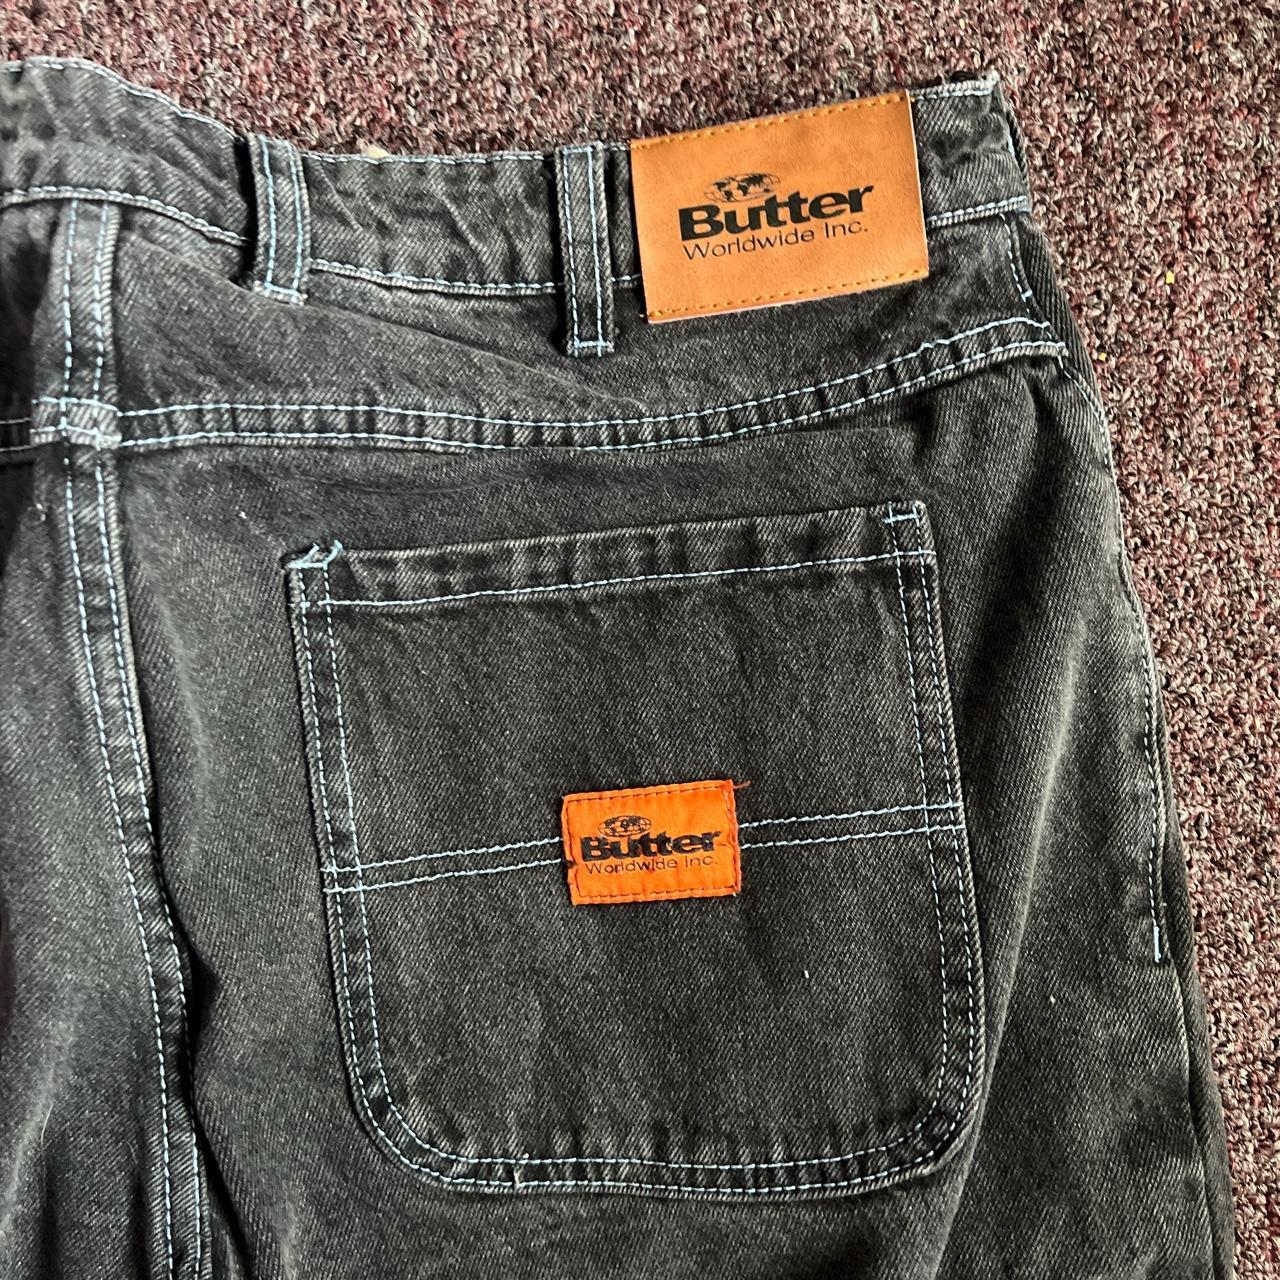 Butter Goods Pants Size 32 (Baggiest), Worn about